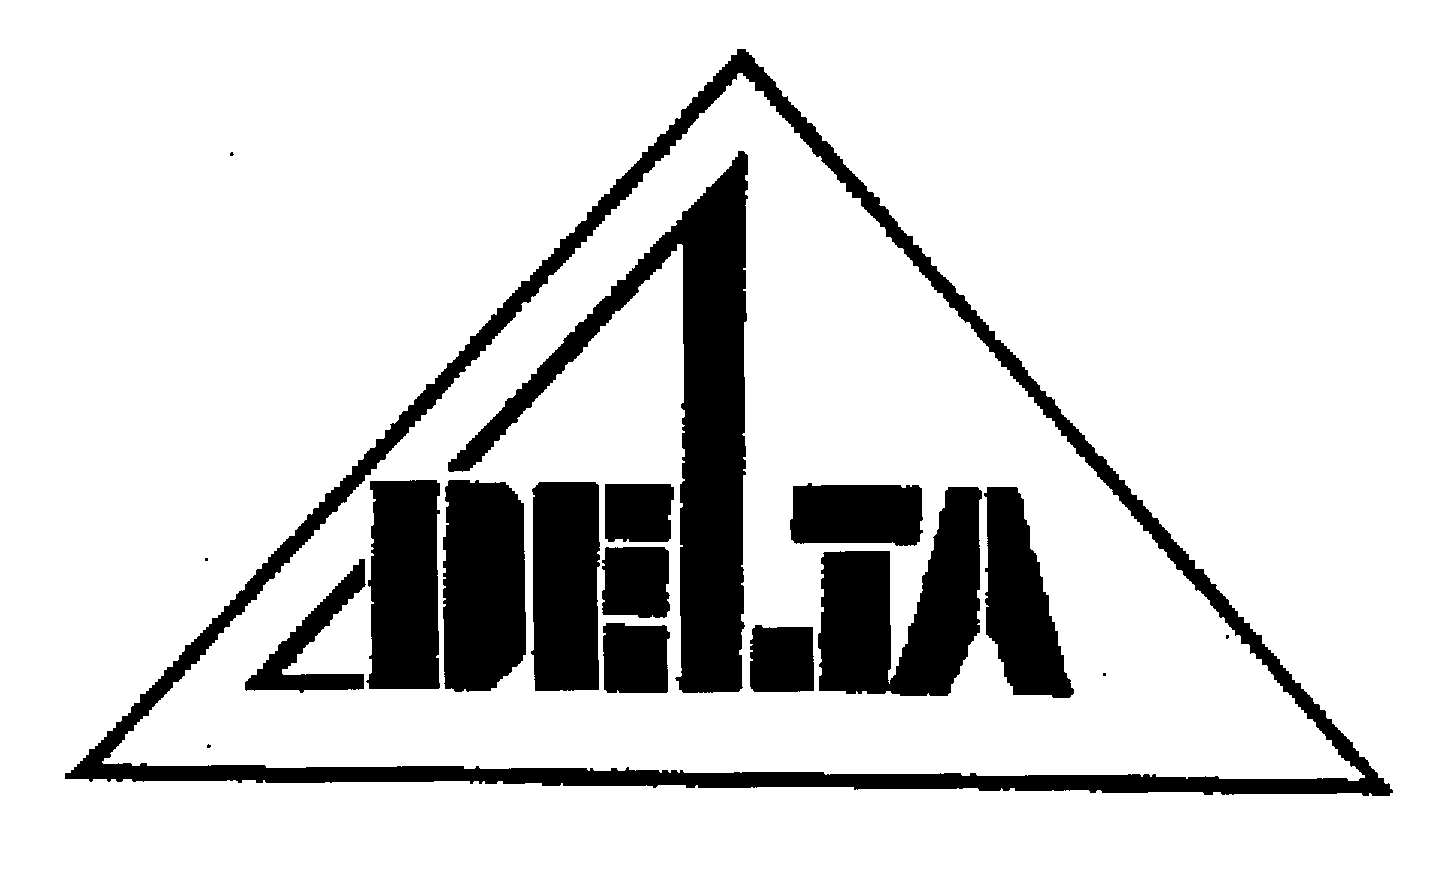  DELTA AND GREEK LETTER MEANING "DELTA"